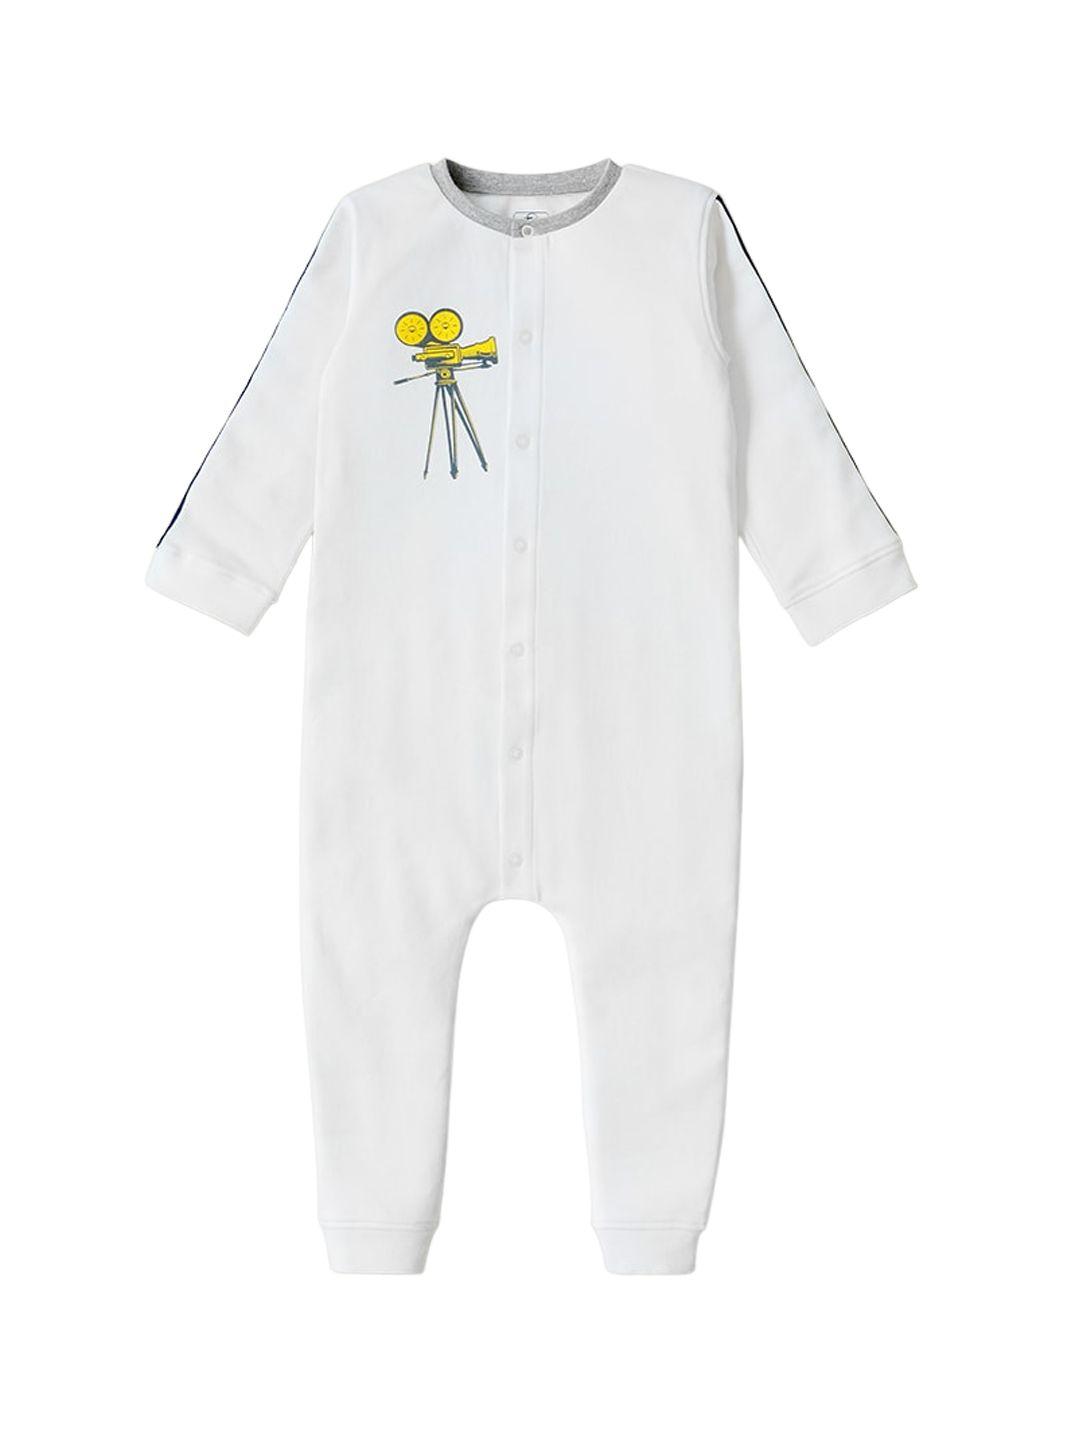 INCLUD Infants Graphic Printed Pure Cotton Romper